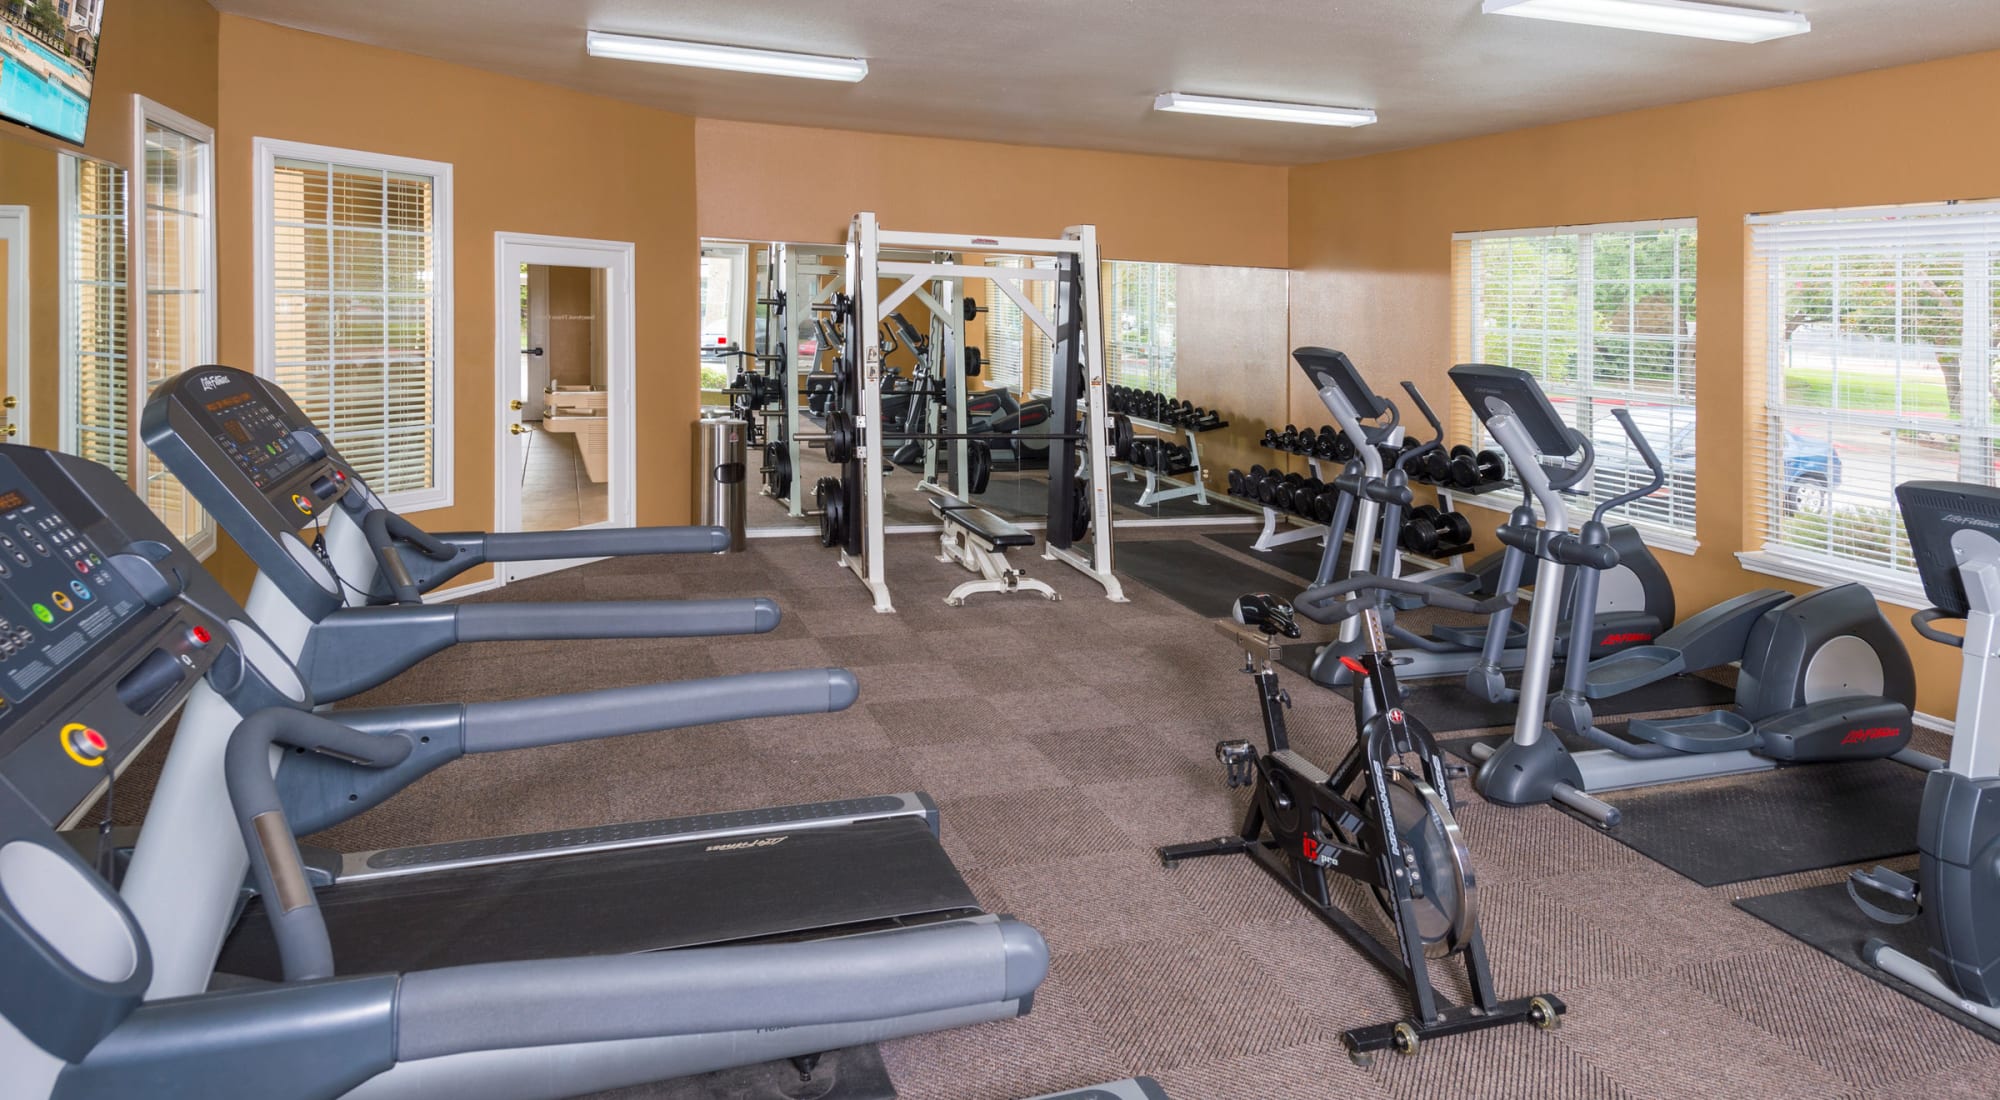 Fitness center at Stoneybrook Apartments & Townhomes